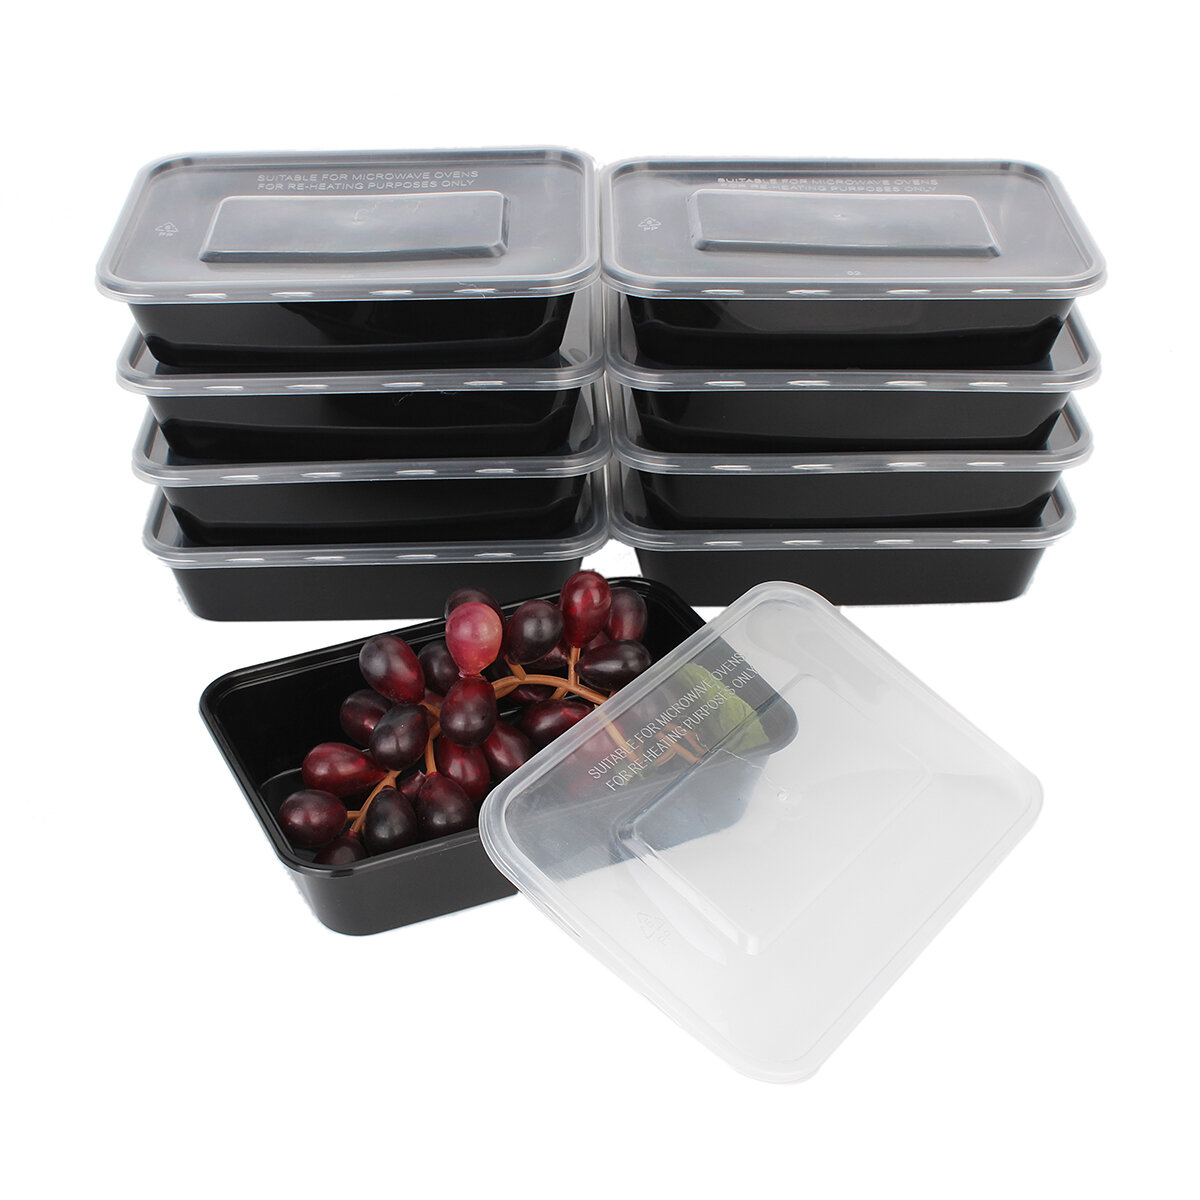 10 stks 16 oz Maaltijd Prep Containers Voedsel Opslag Herbruikbare Microwavable Plastic Box Lunch Ta